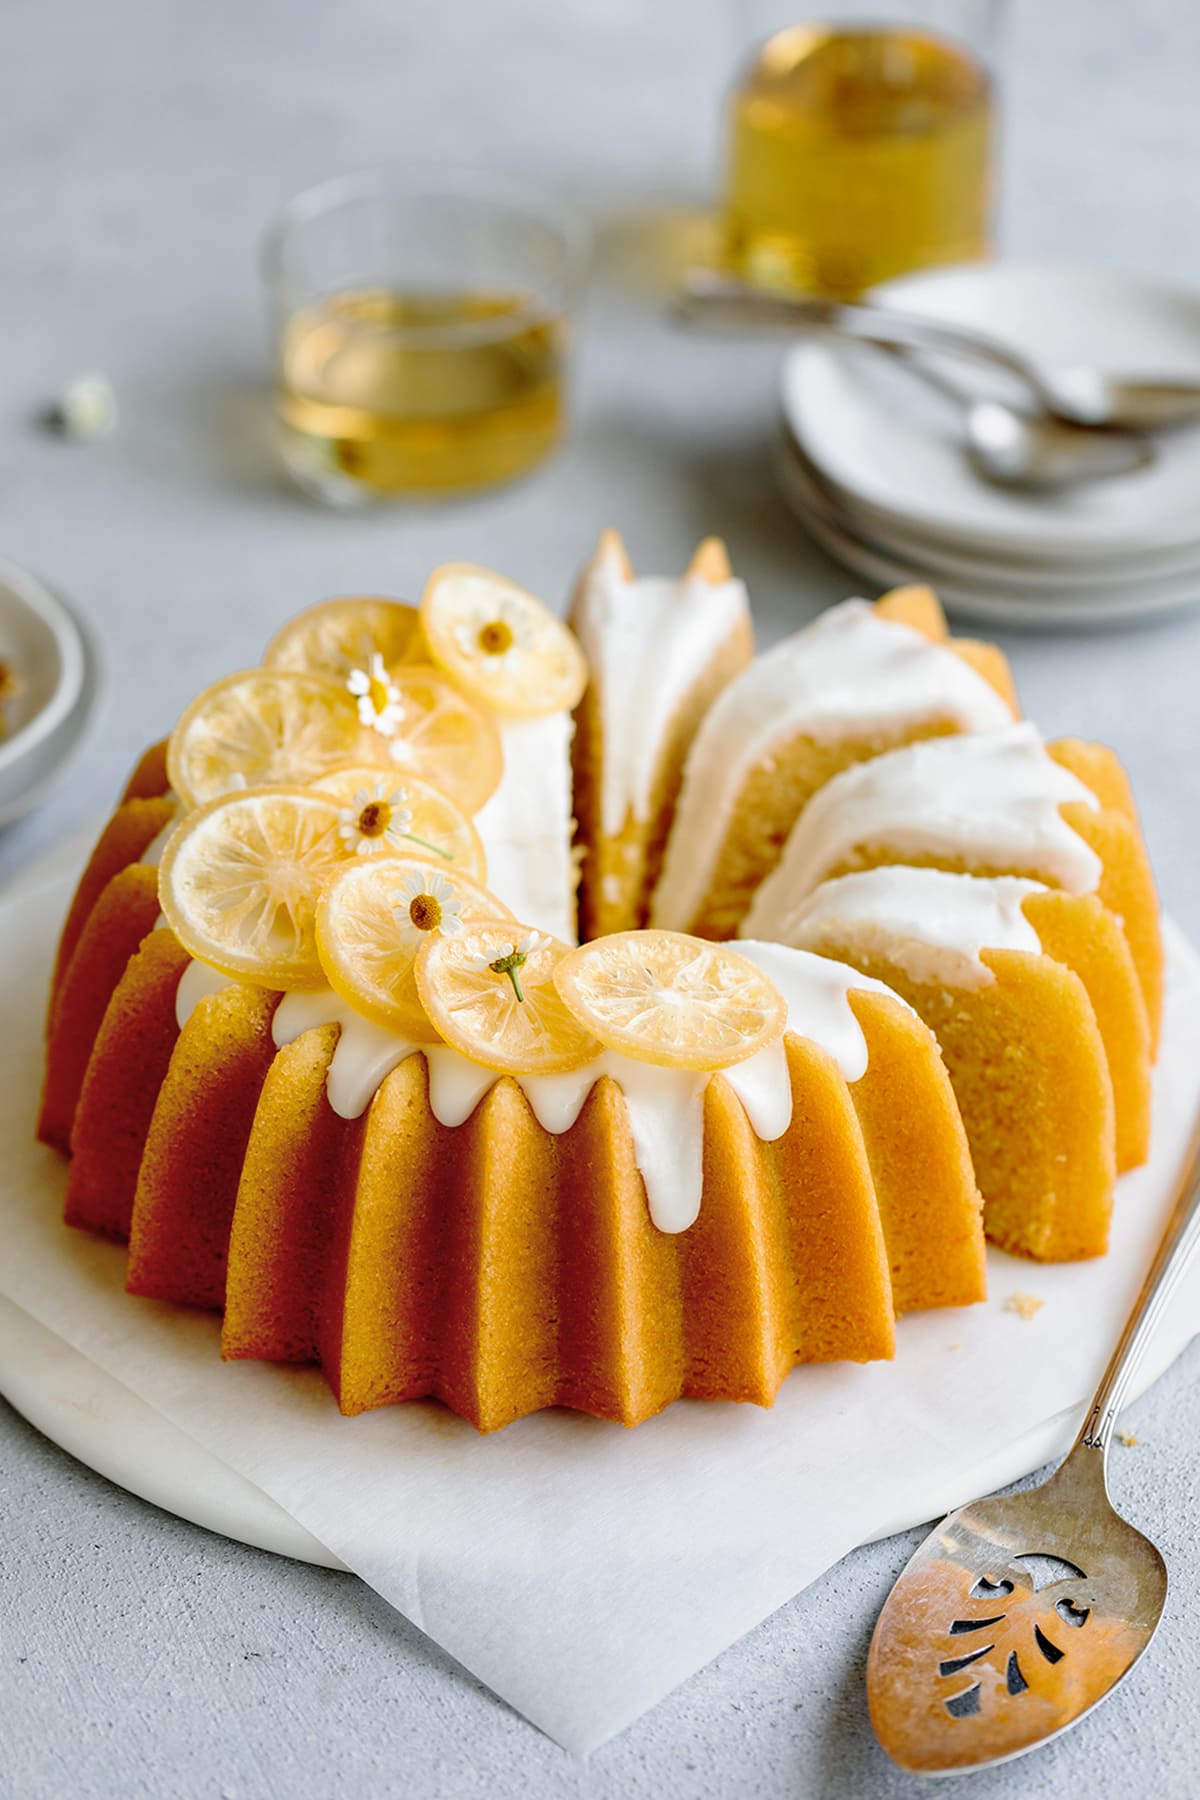 Lemon Olive Oil Bundt Cake is a tender and delicious Italian-style cake bursting with bright lemon flavor. This wonderfully light cake topped with lemon glaze is easy to make, perfect for any occasion.